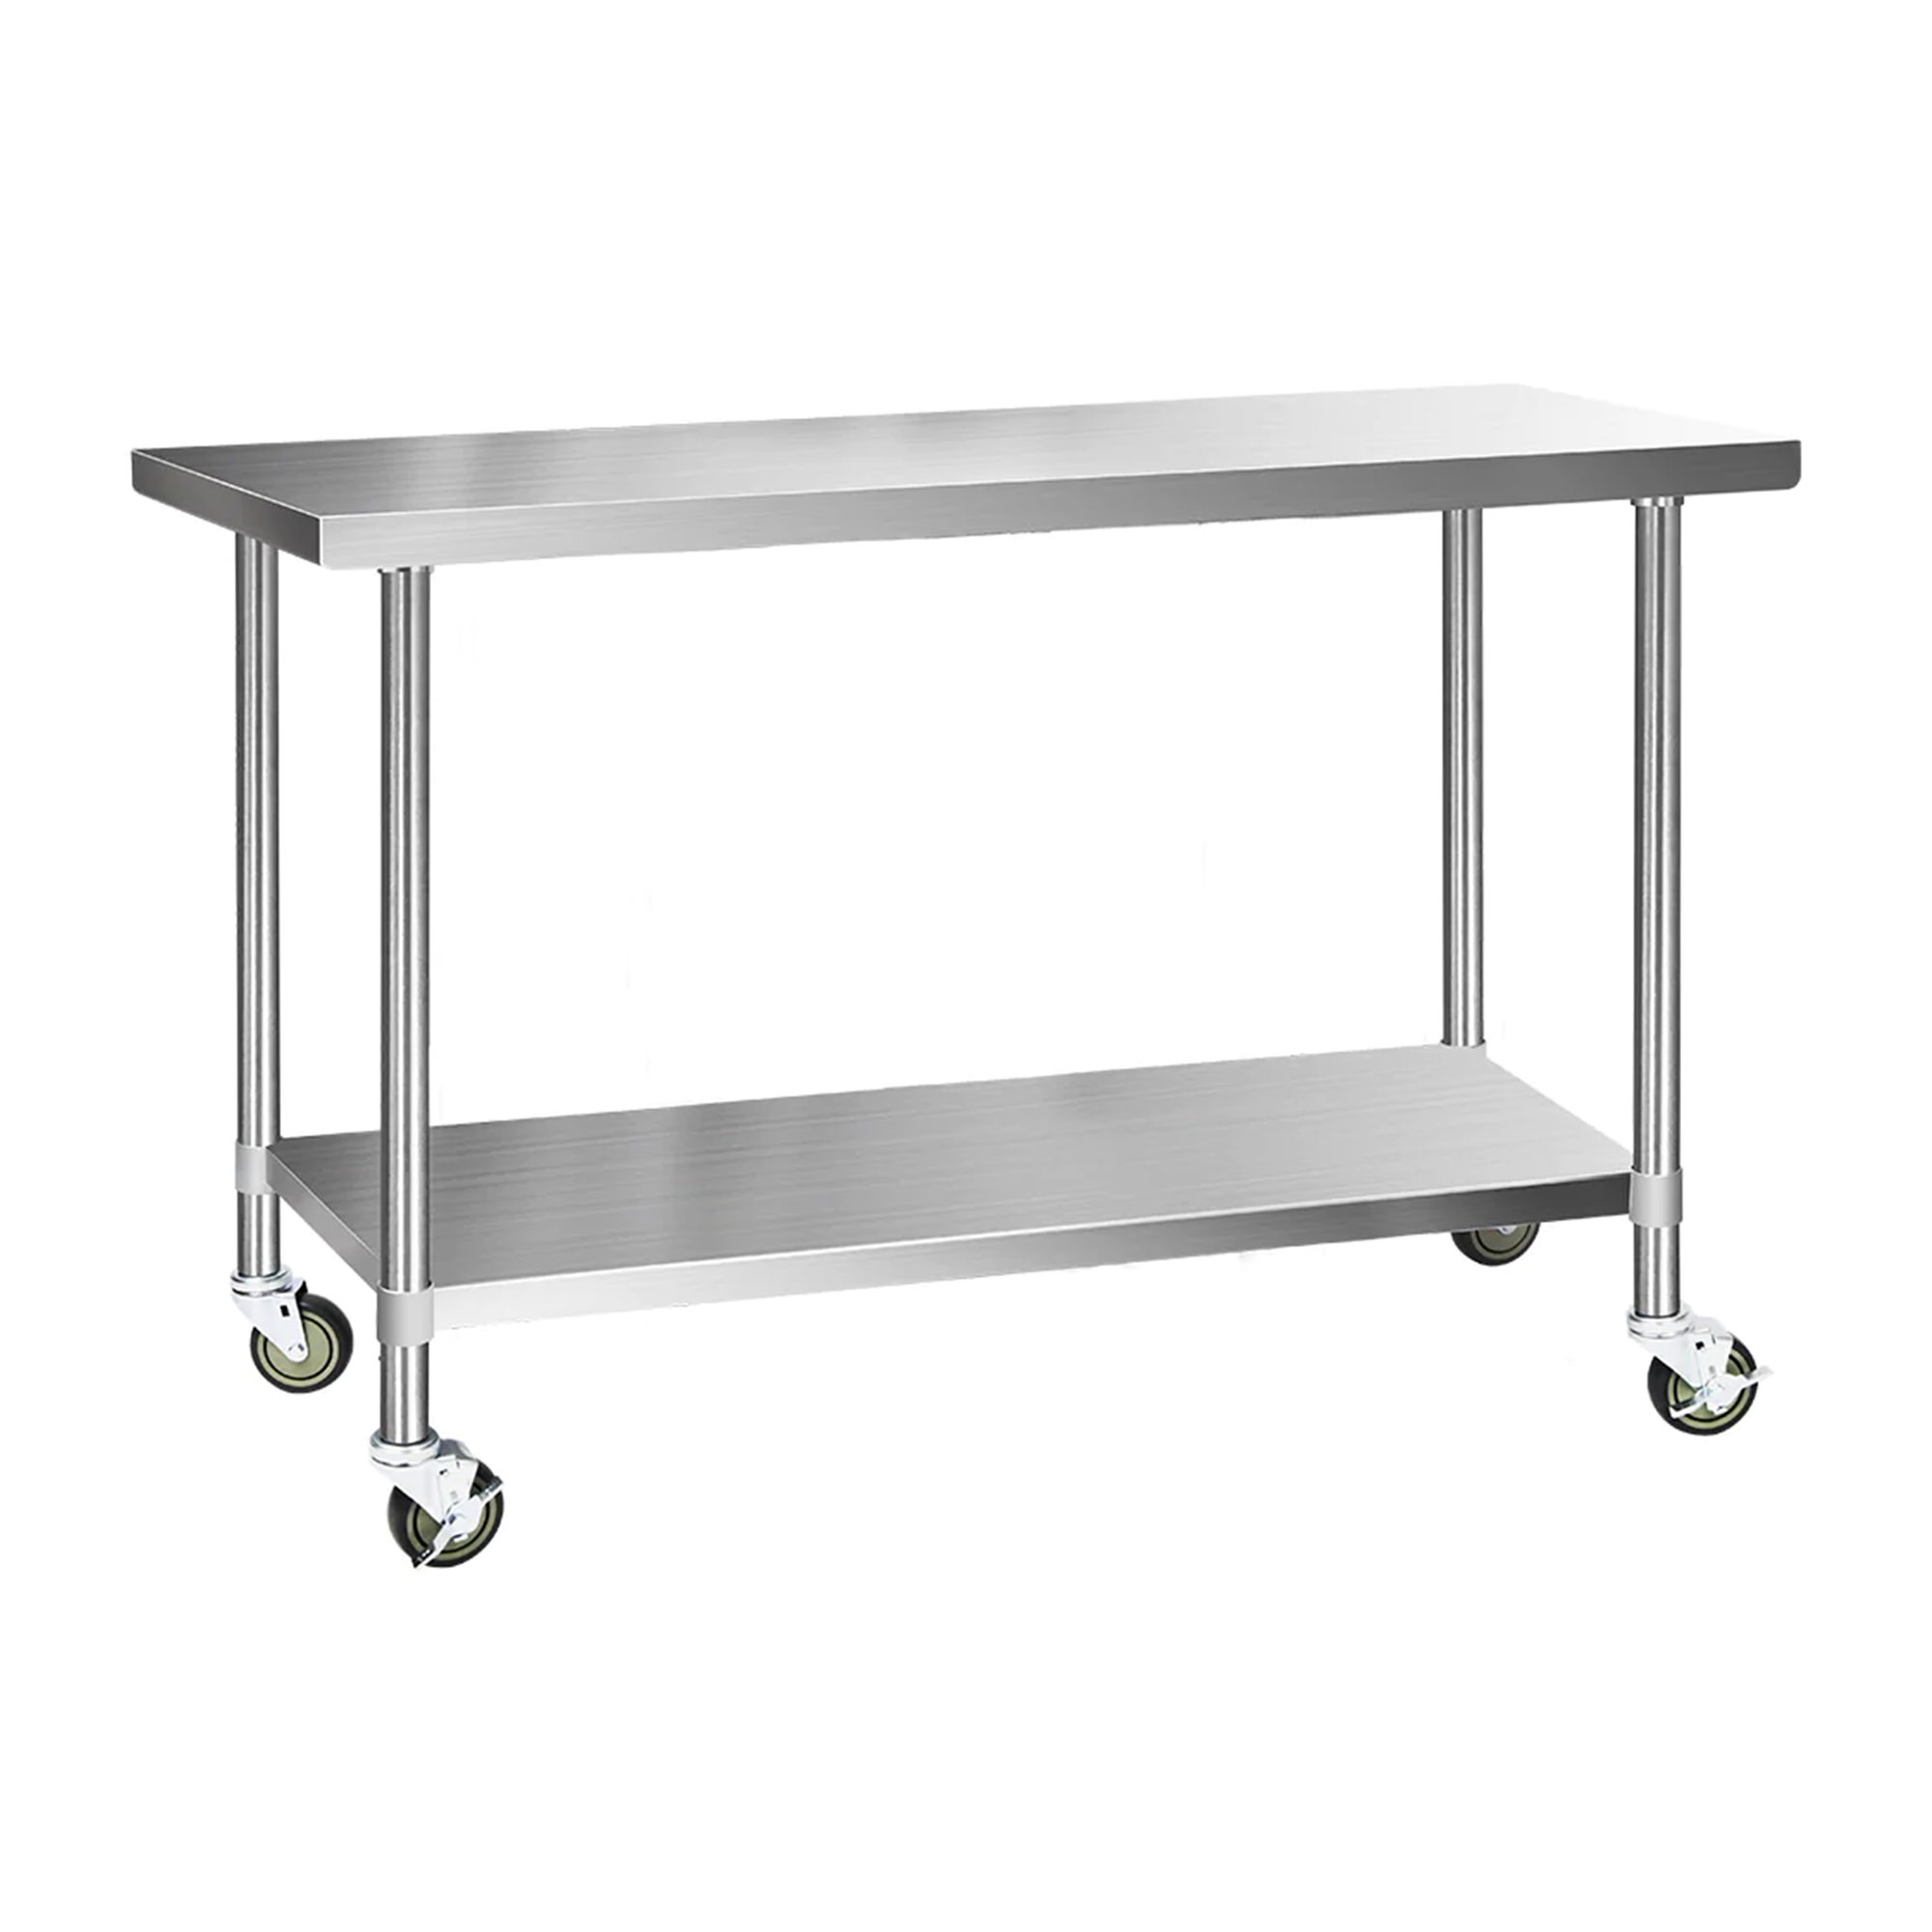 Cefito 304 Stainless Steel Kitchen Bench with Wheels 152.4x61cm Image 1